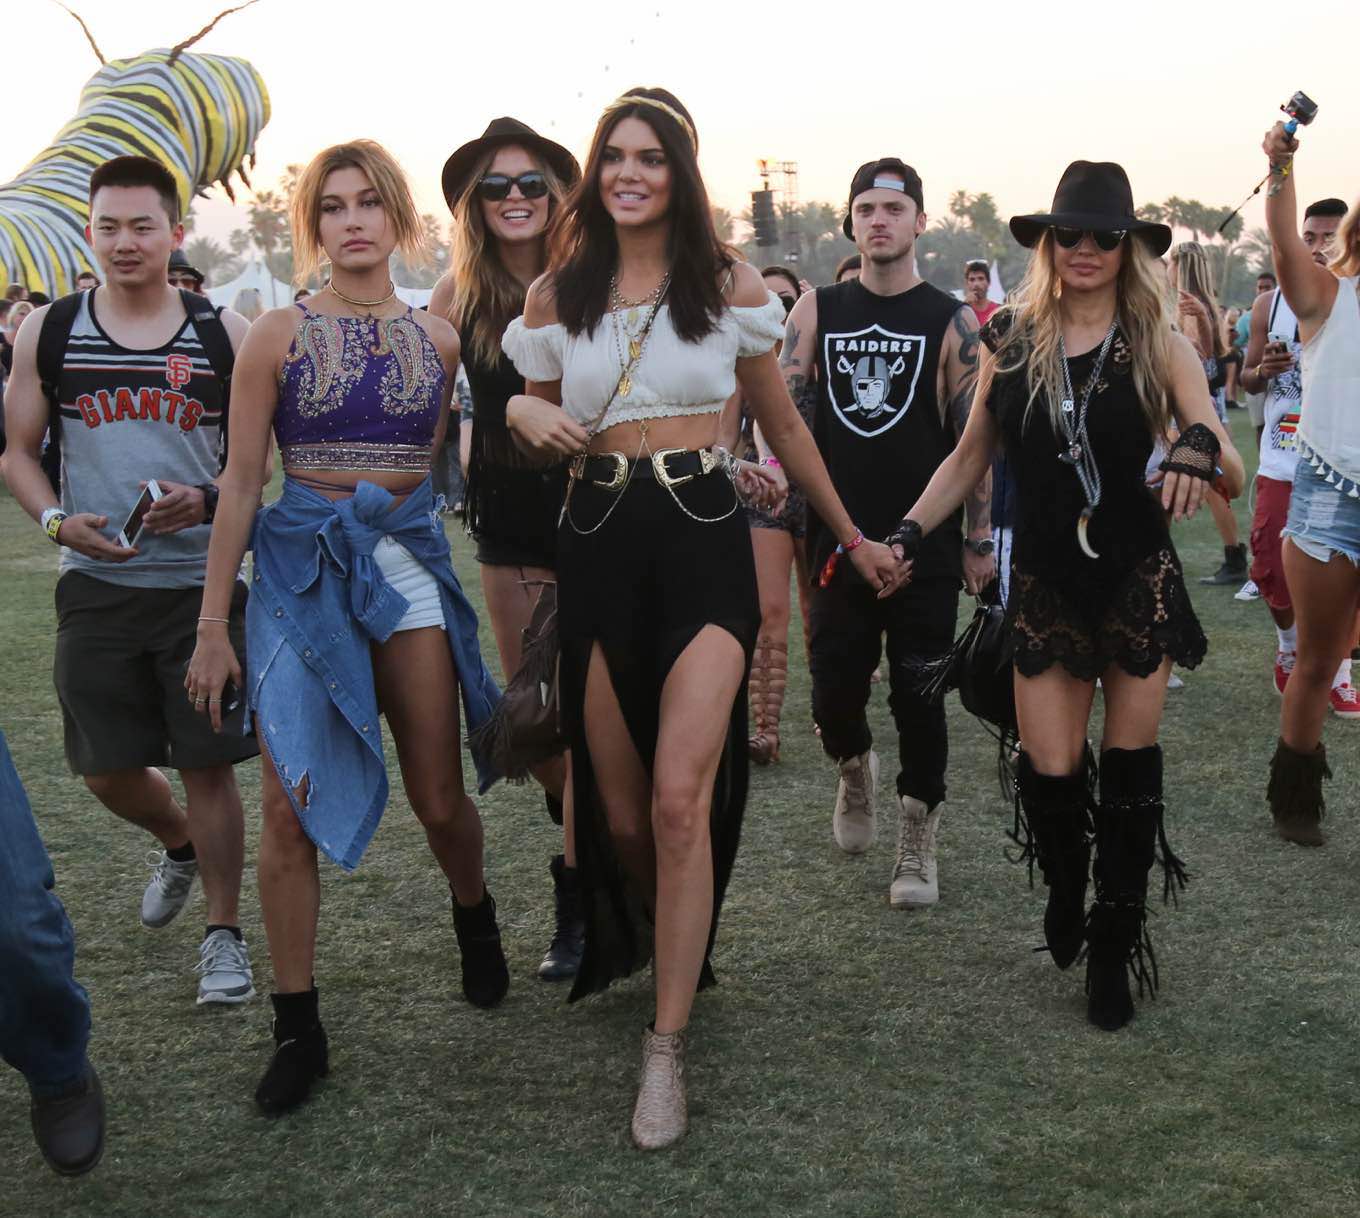 Coachella 2023: The best celebrity outfits from the desert festival so far